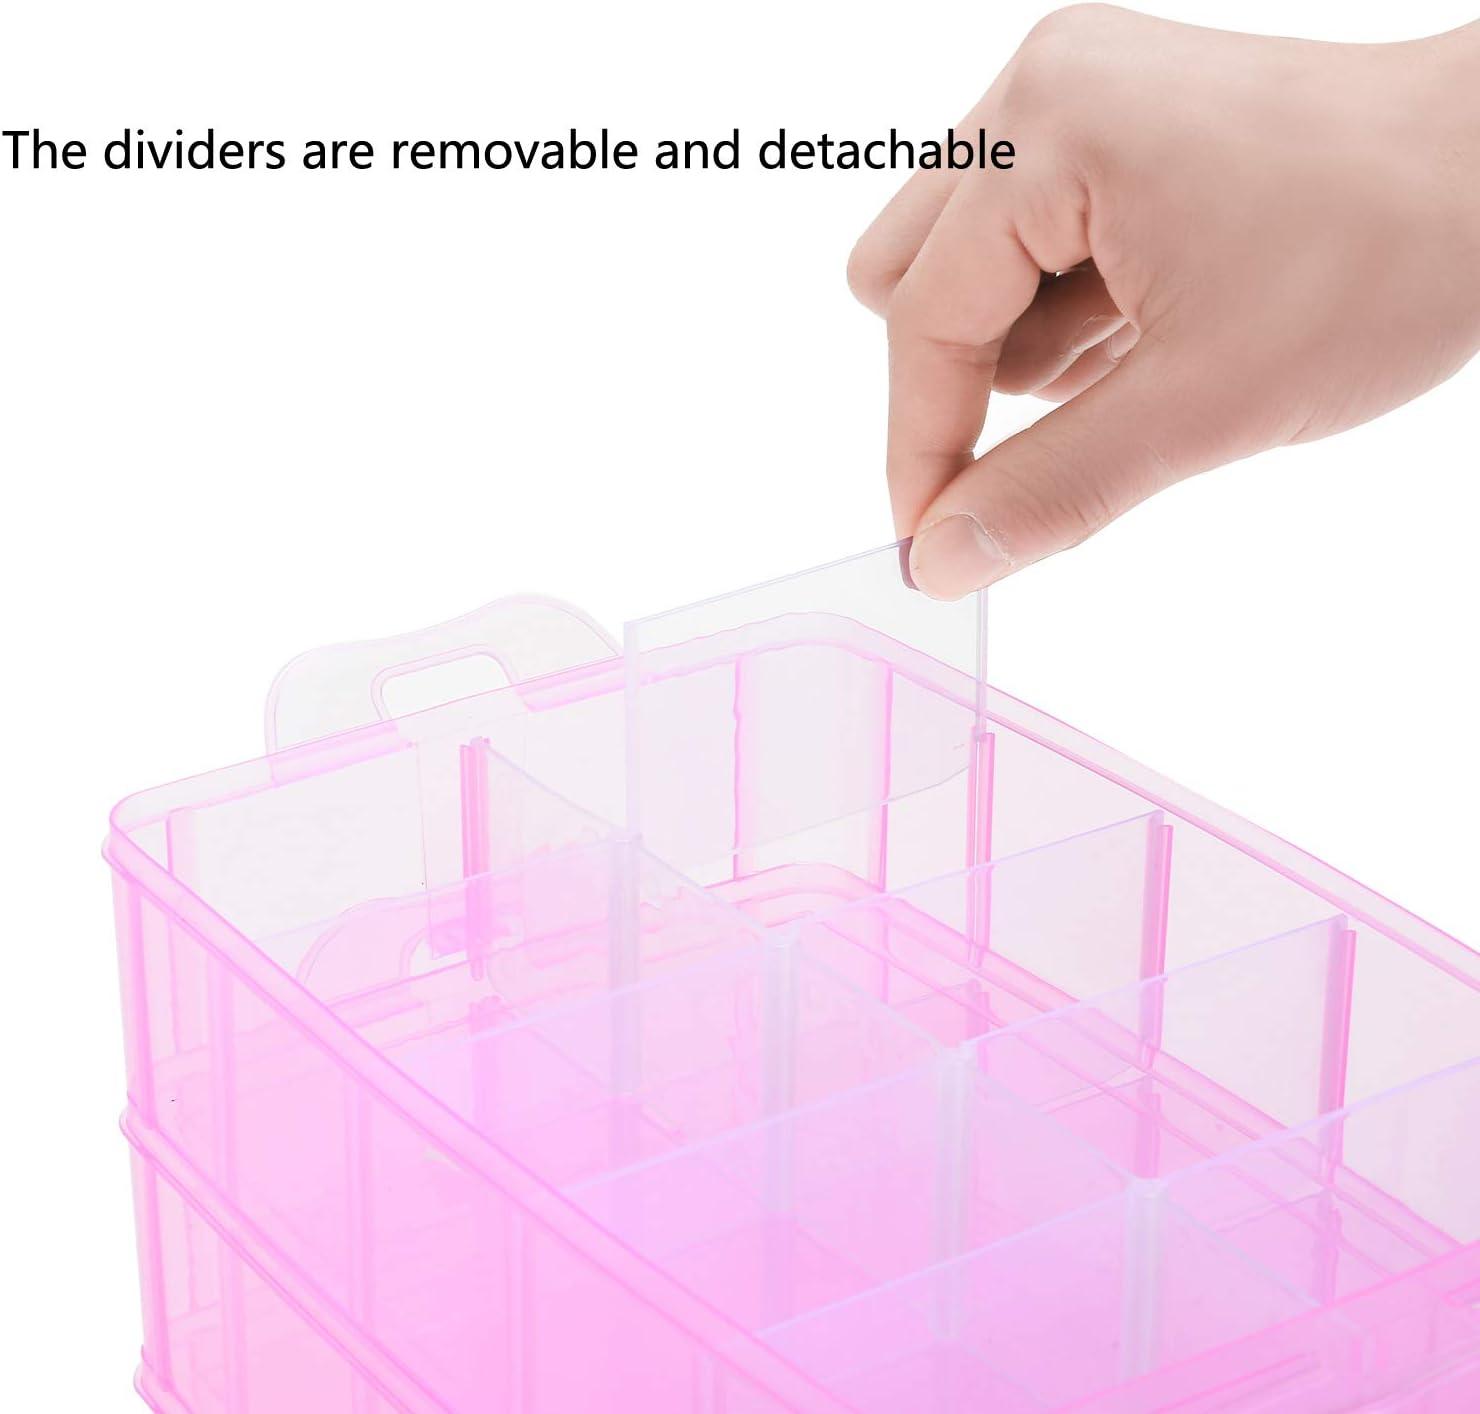 1 Plastic Bead Organizer Box, Adjustable Dividers, Sewing storage,  Organizer Container Storage Box, Dividers for bead arts and crafts